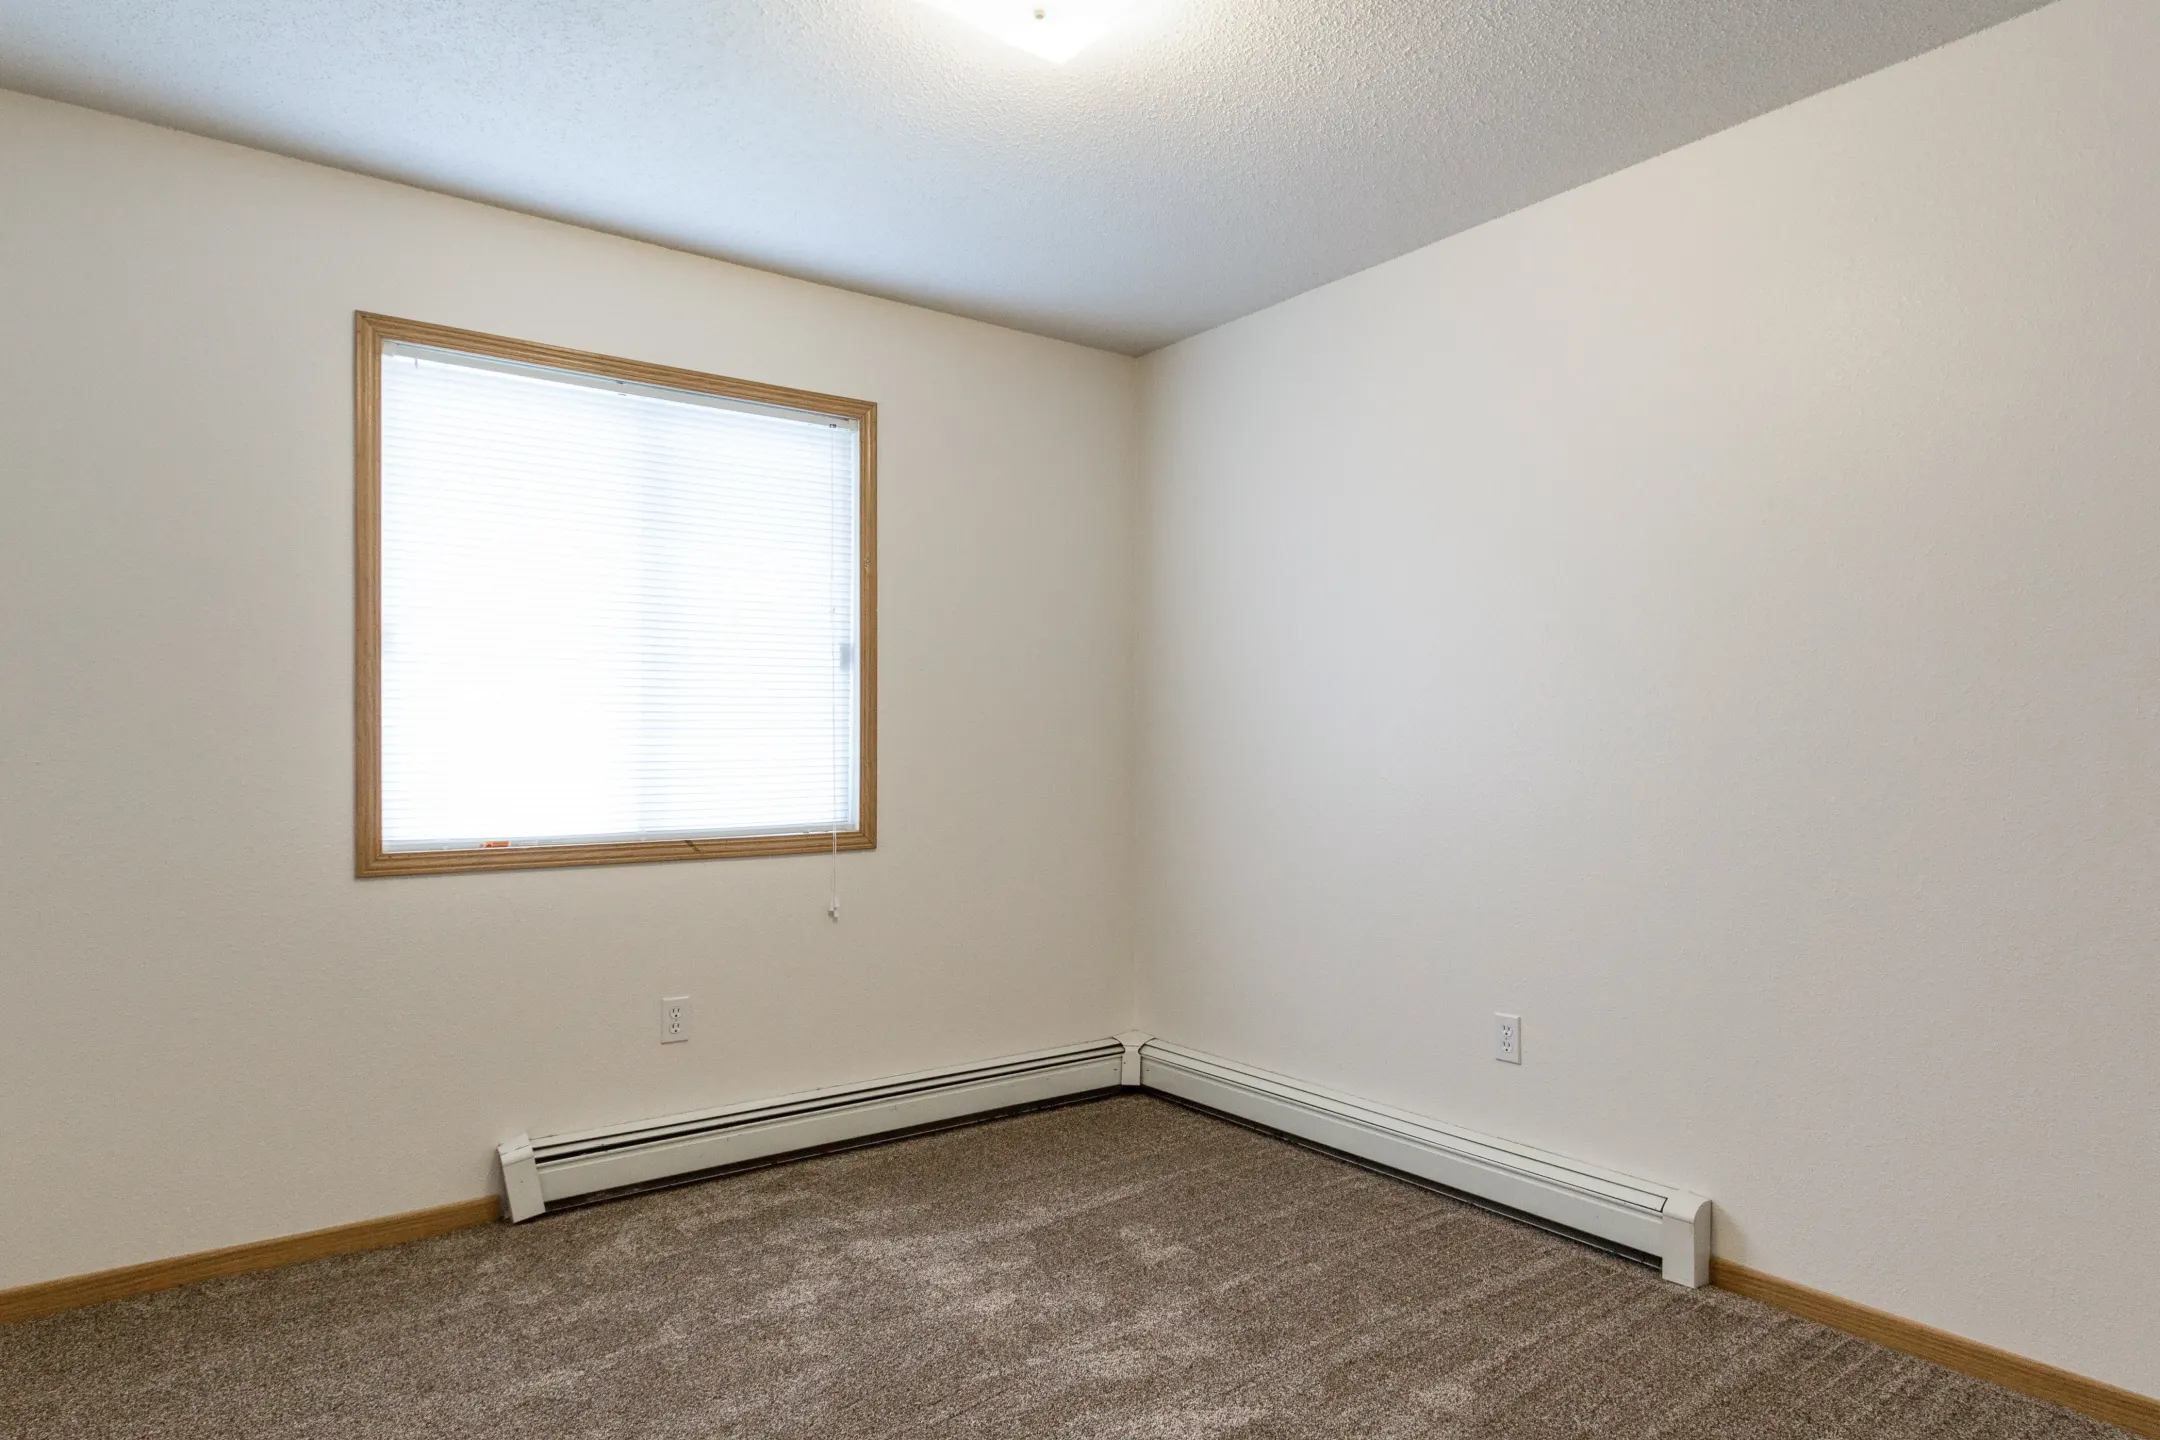 Bedroom - Wheatland Place Apartments & Townhomes - Fargo, ND